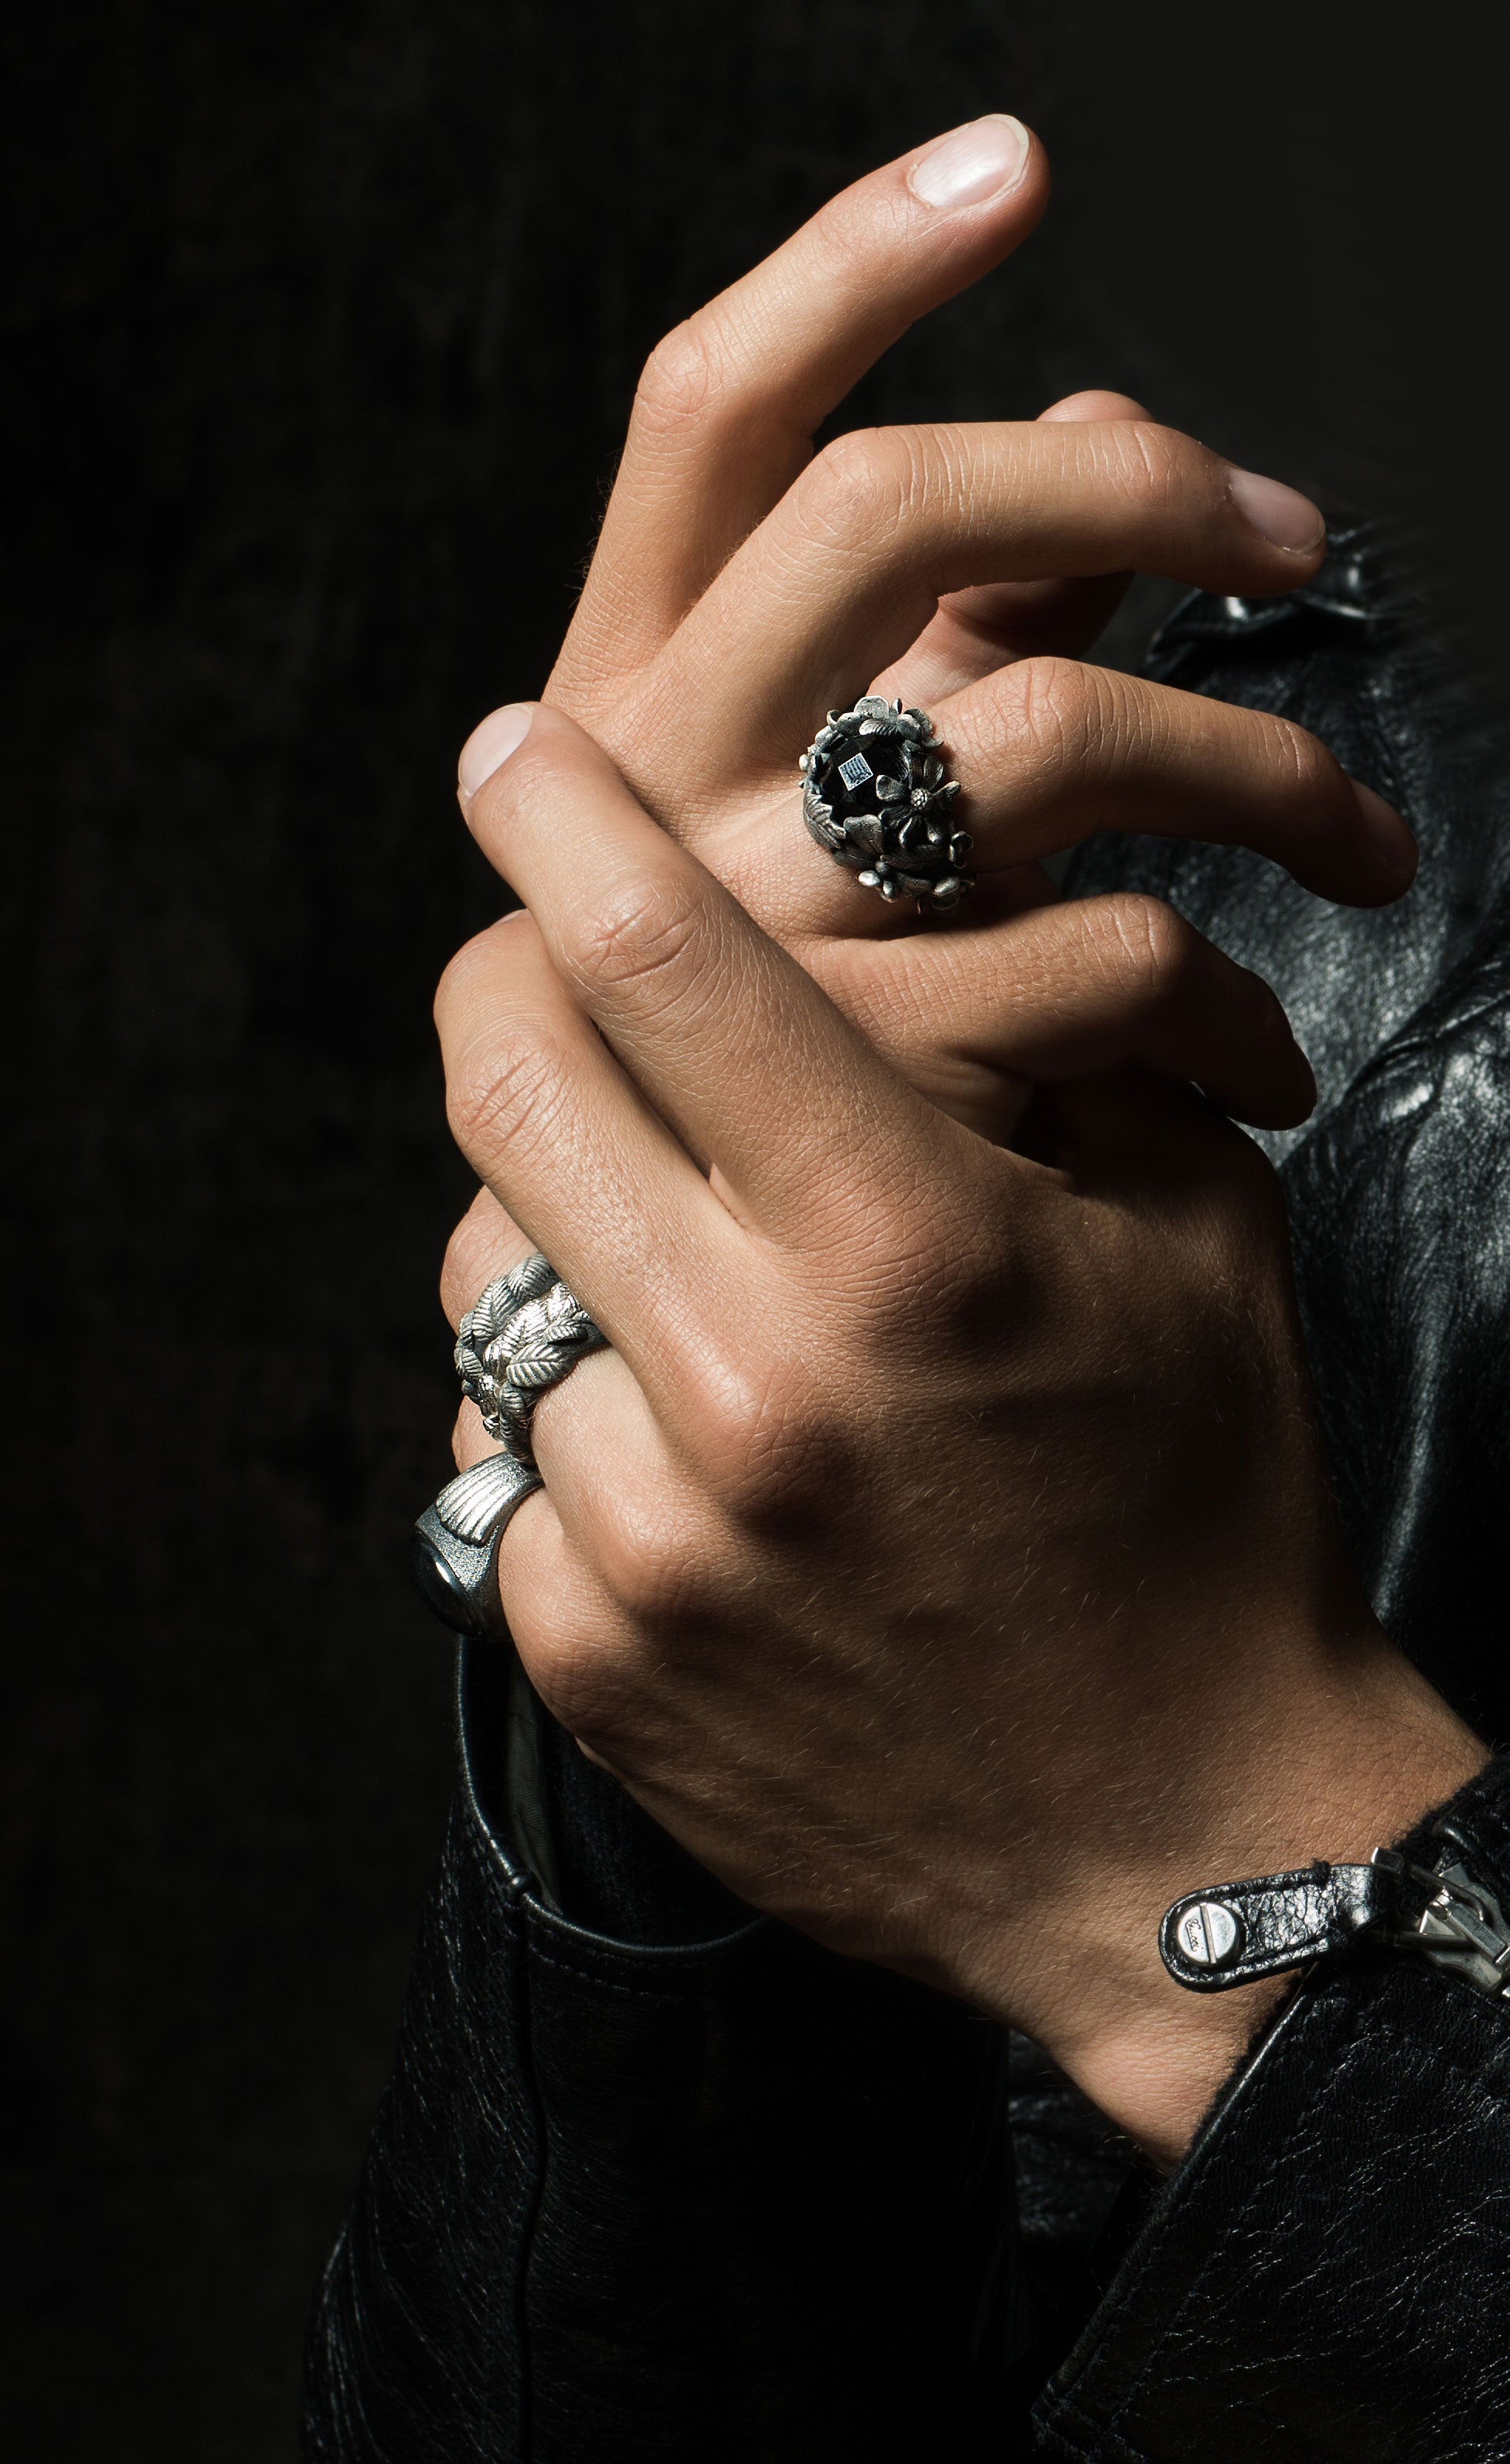 Mens Fashion Jewelry \ Men's Fashion: the lords of the rings by seven50